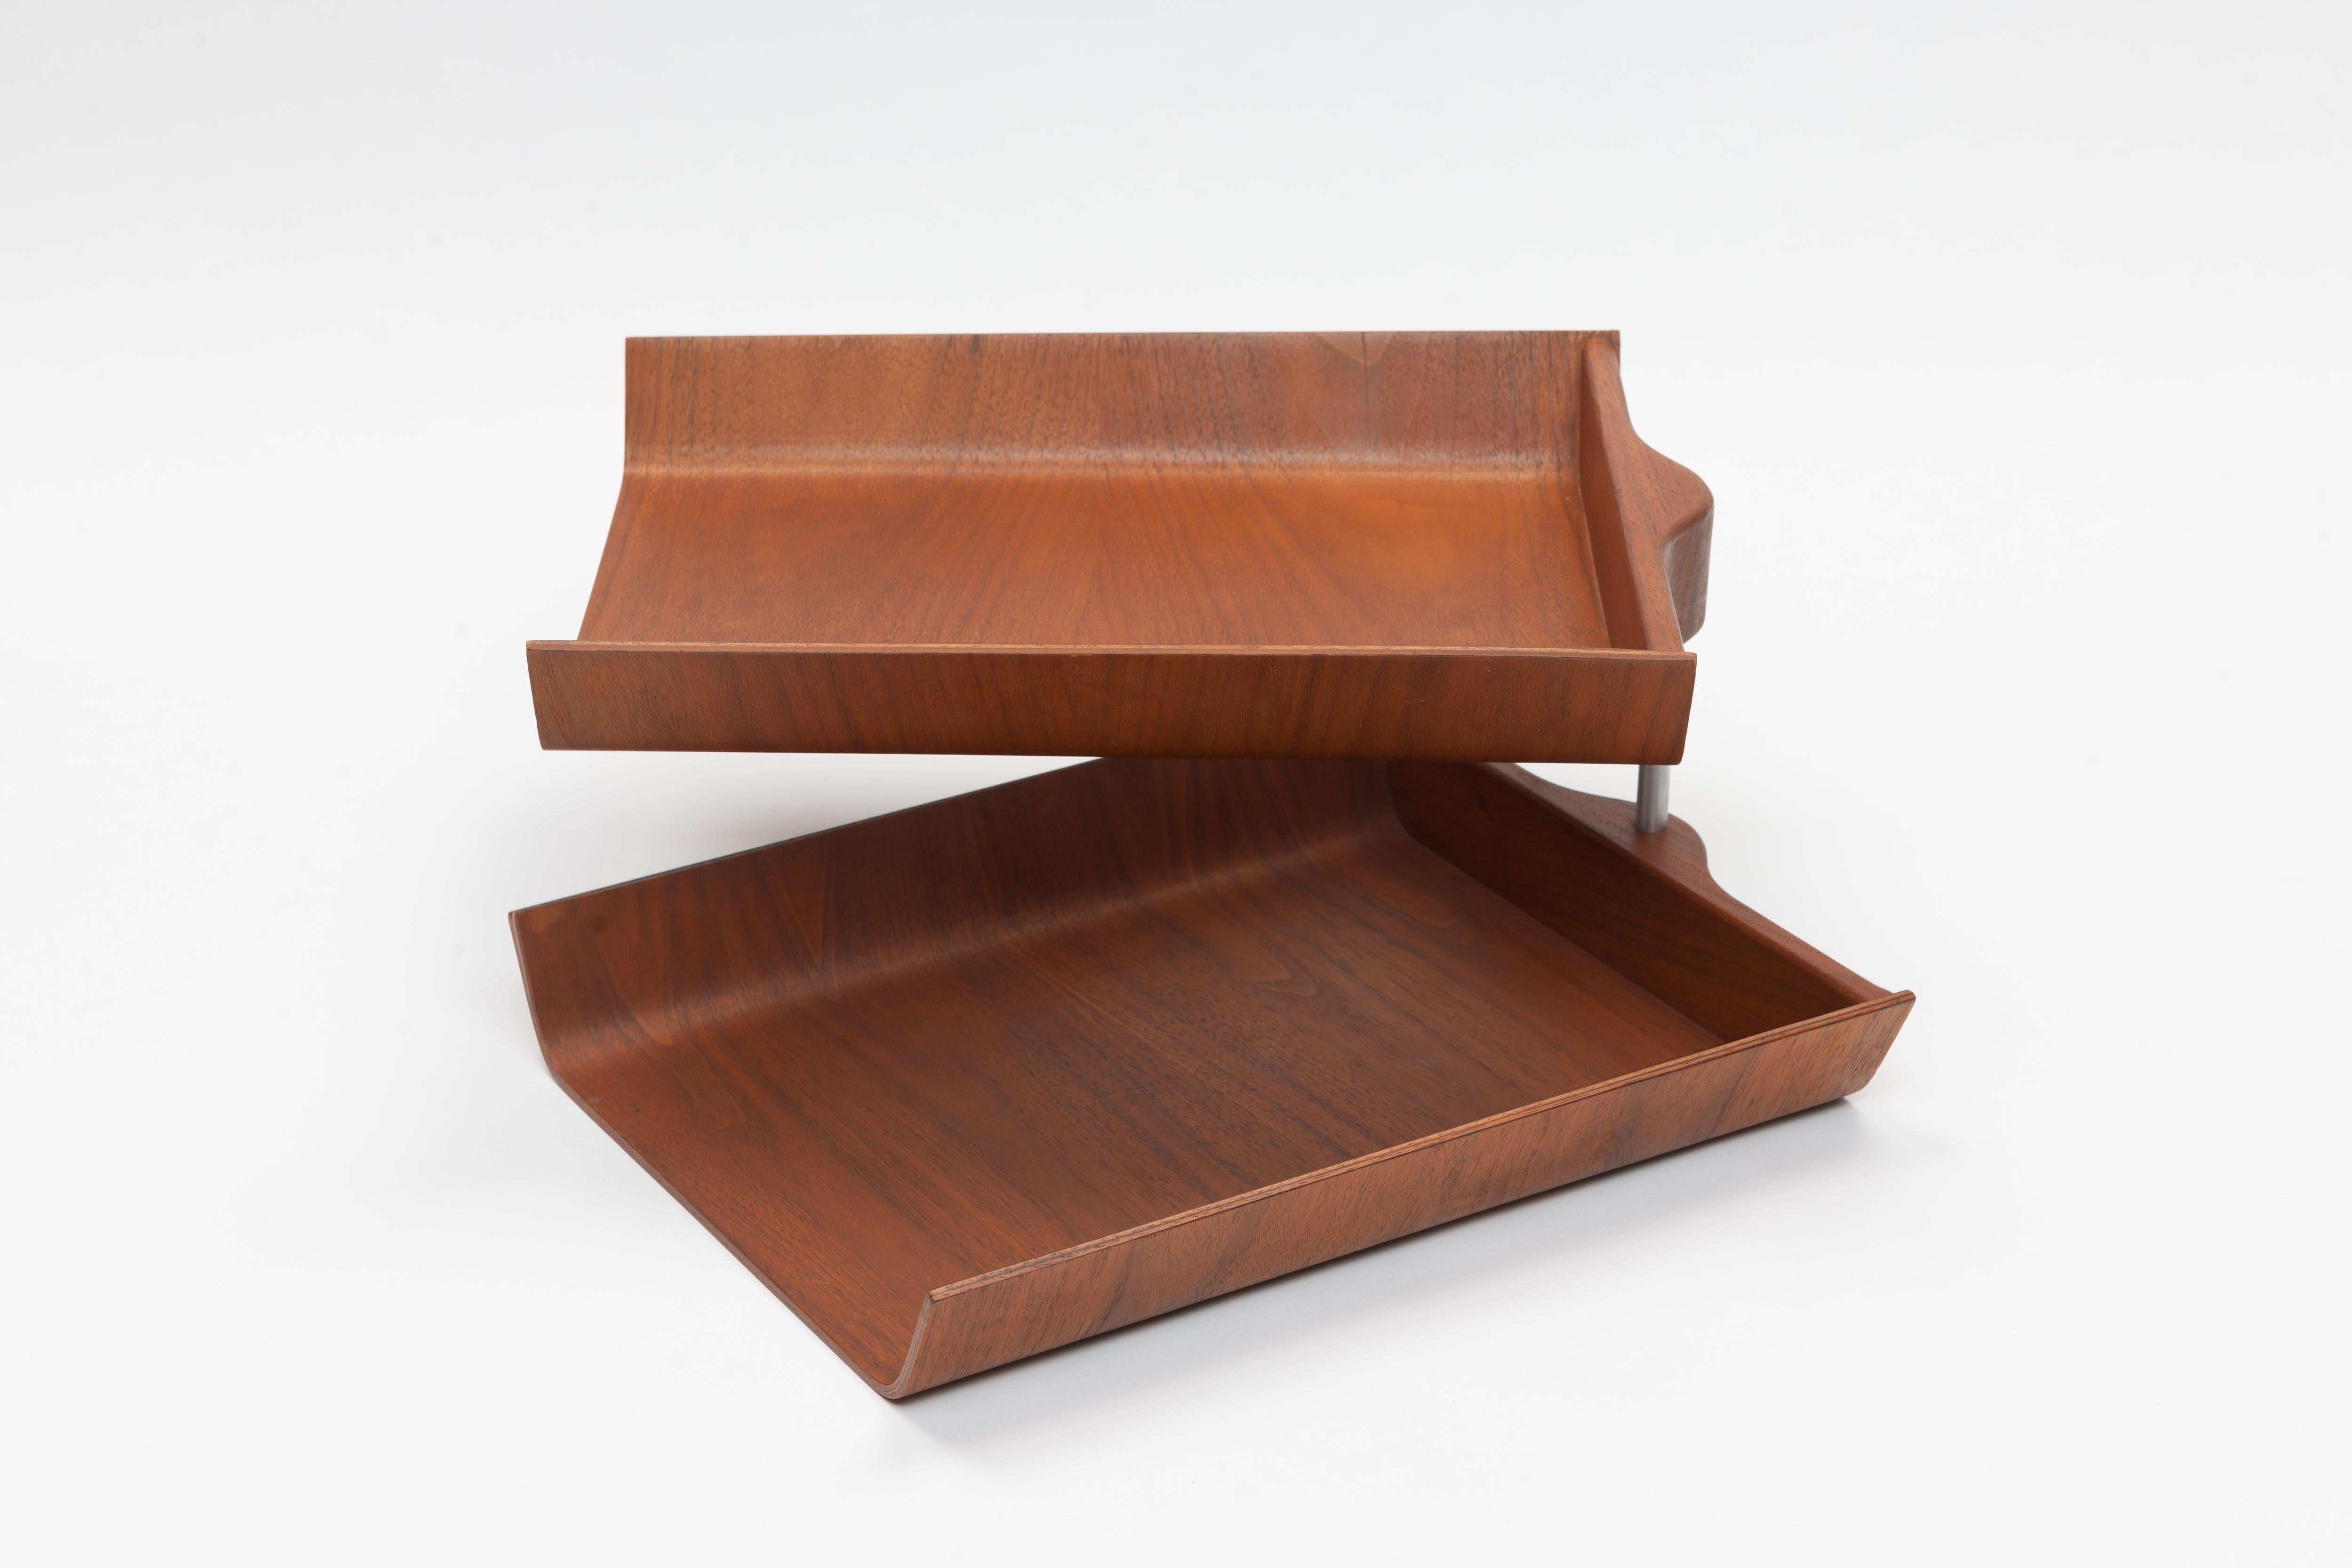 This double pivoting desk tray was designed by American designer Florence Knoll in 1948 and is a collectable midcentury accessory. The trays are made of walnut plywood with a solid wooden back pivoting on a metal support.
The underside of one of